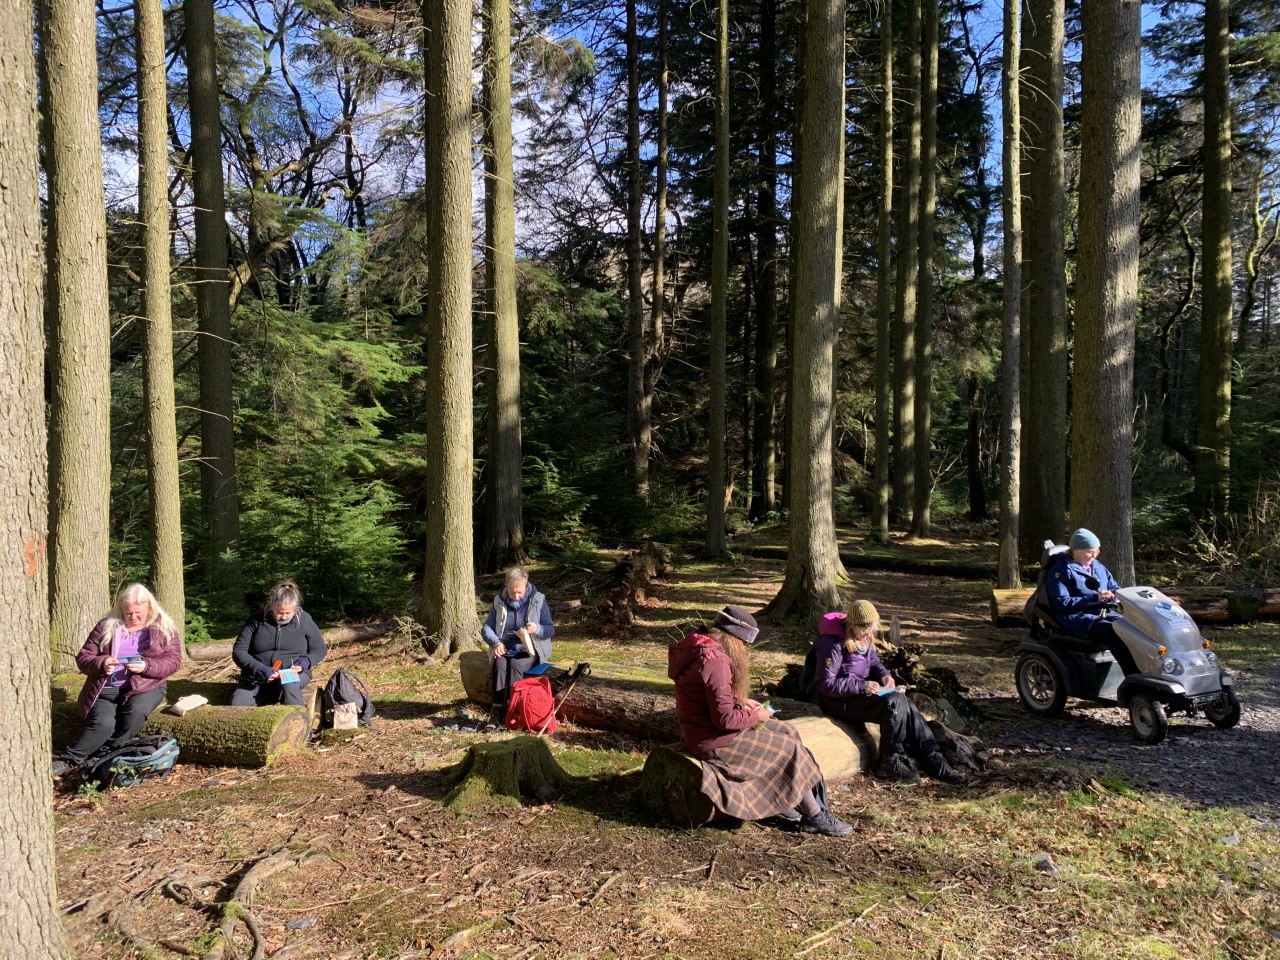 A group of people on a Walking and Weaving event in a forest.